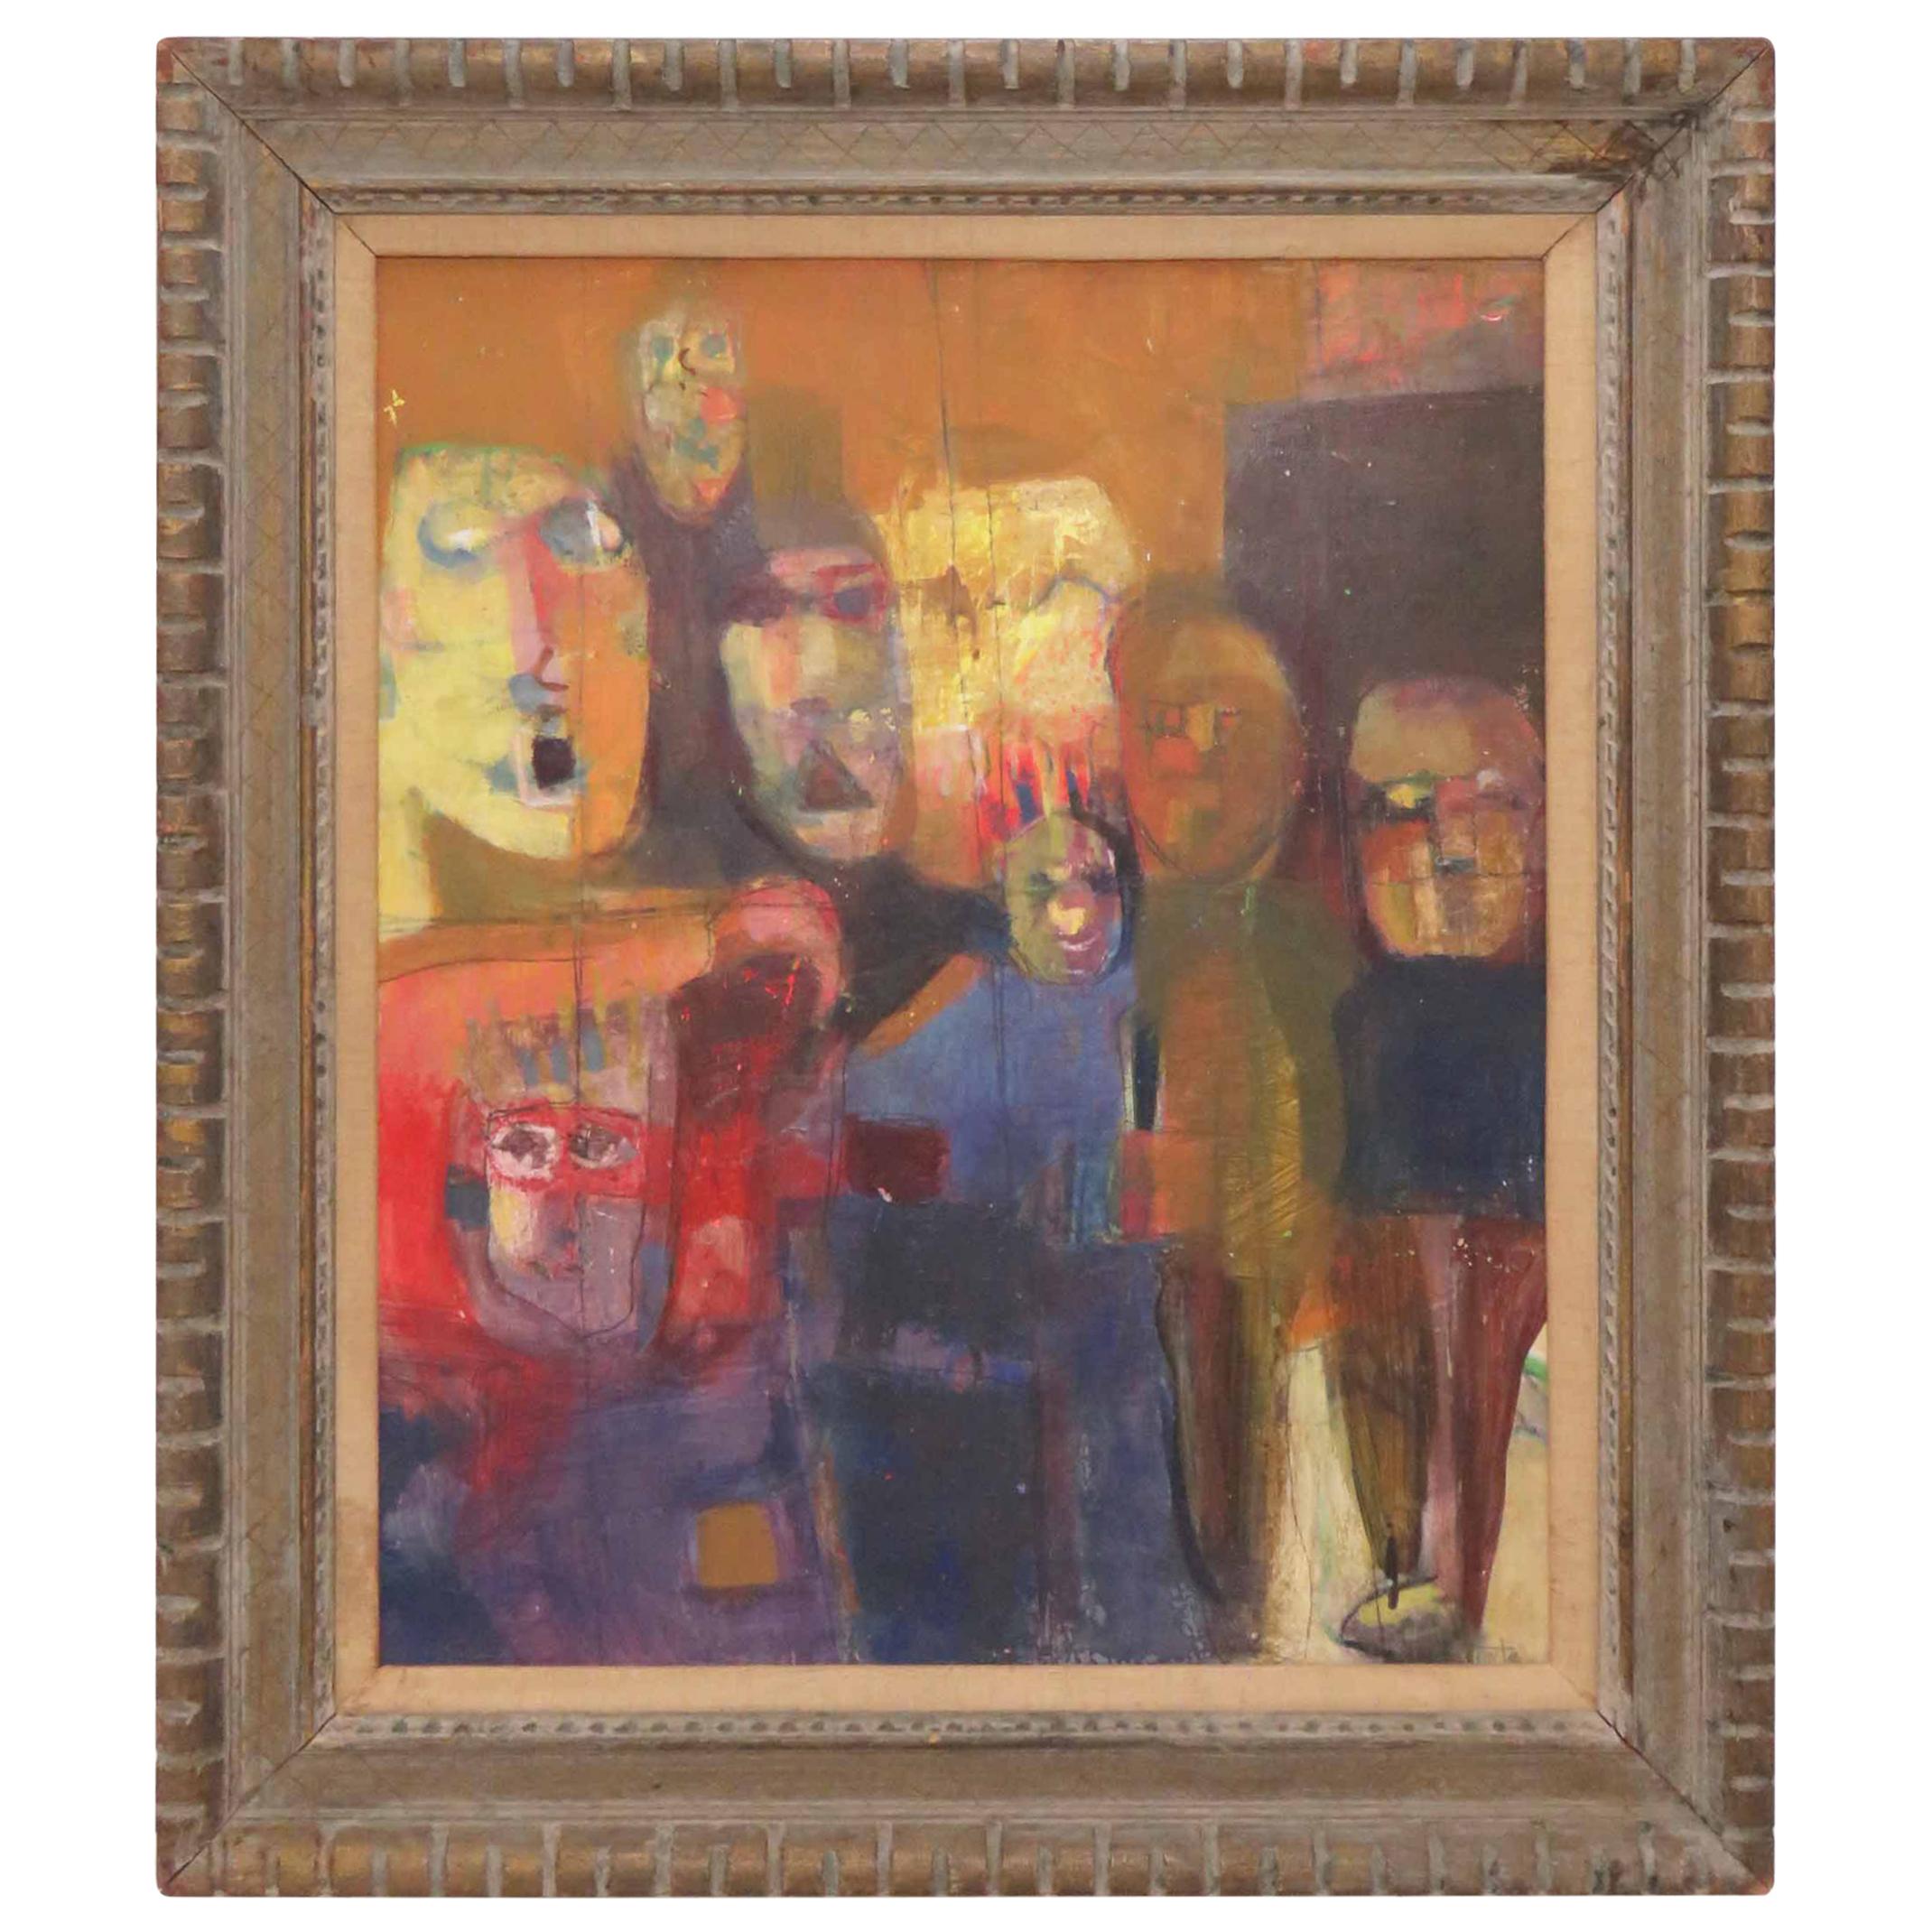 Modernist Figurative Group Painting, Signed Assante, circa 1960s